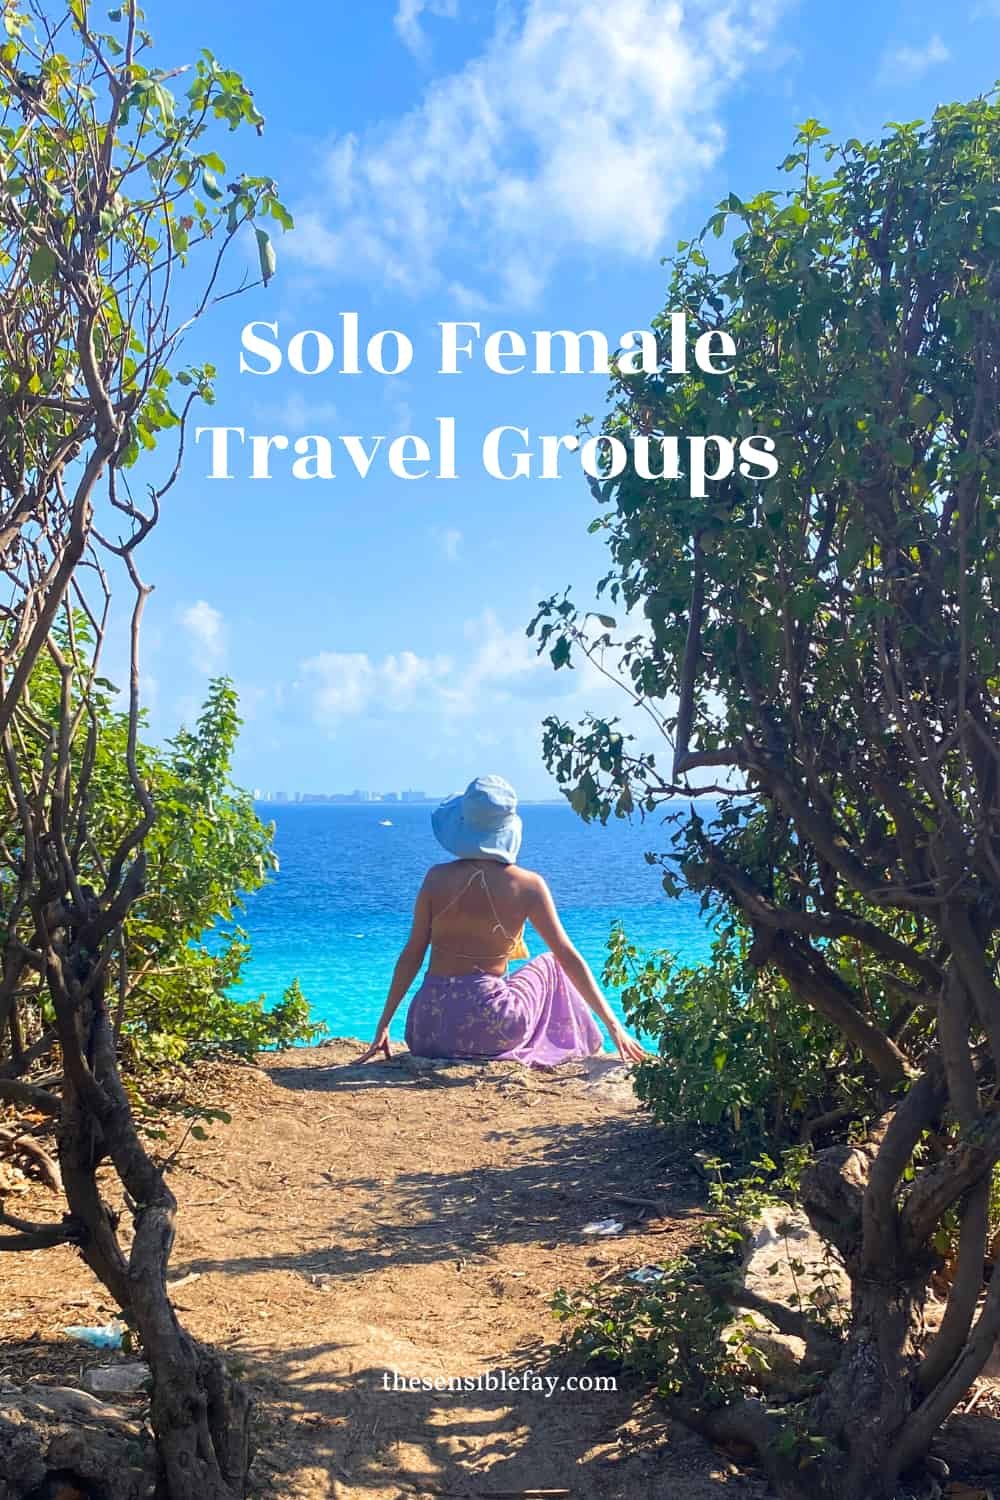 Solo Female Travel Groups   Tours Pins.jpg